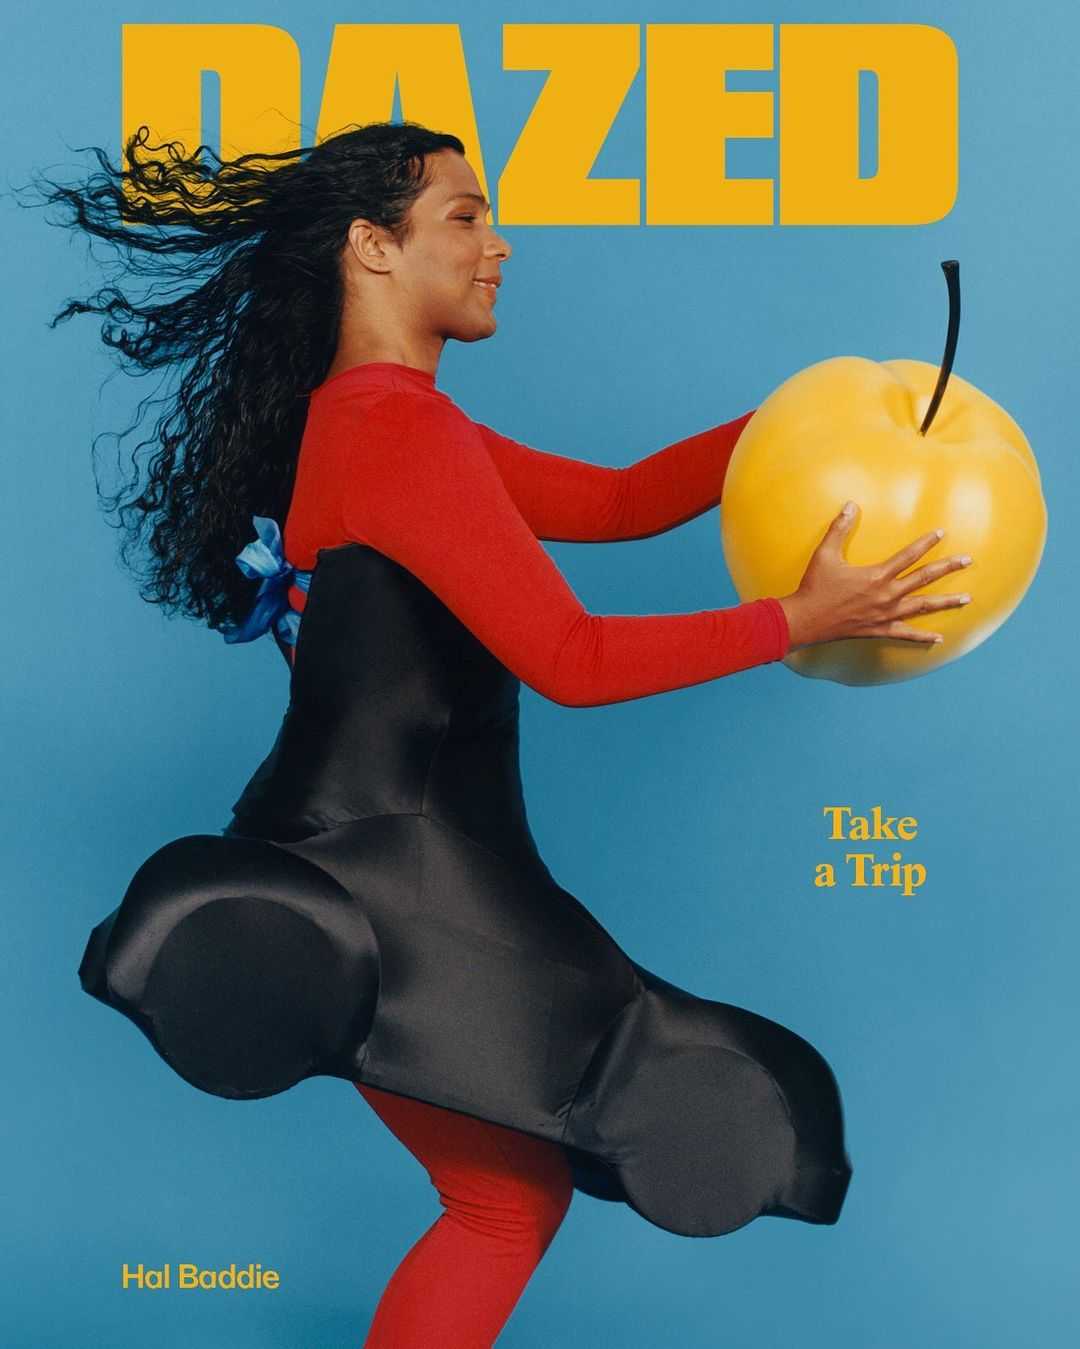 Dazed - The Age of Imagination Issue - 4464